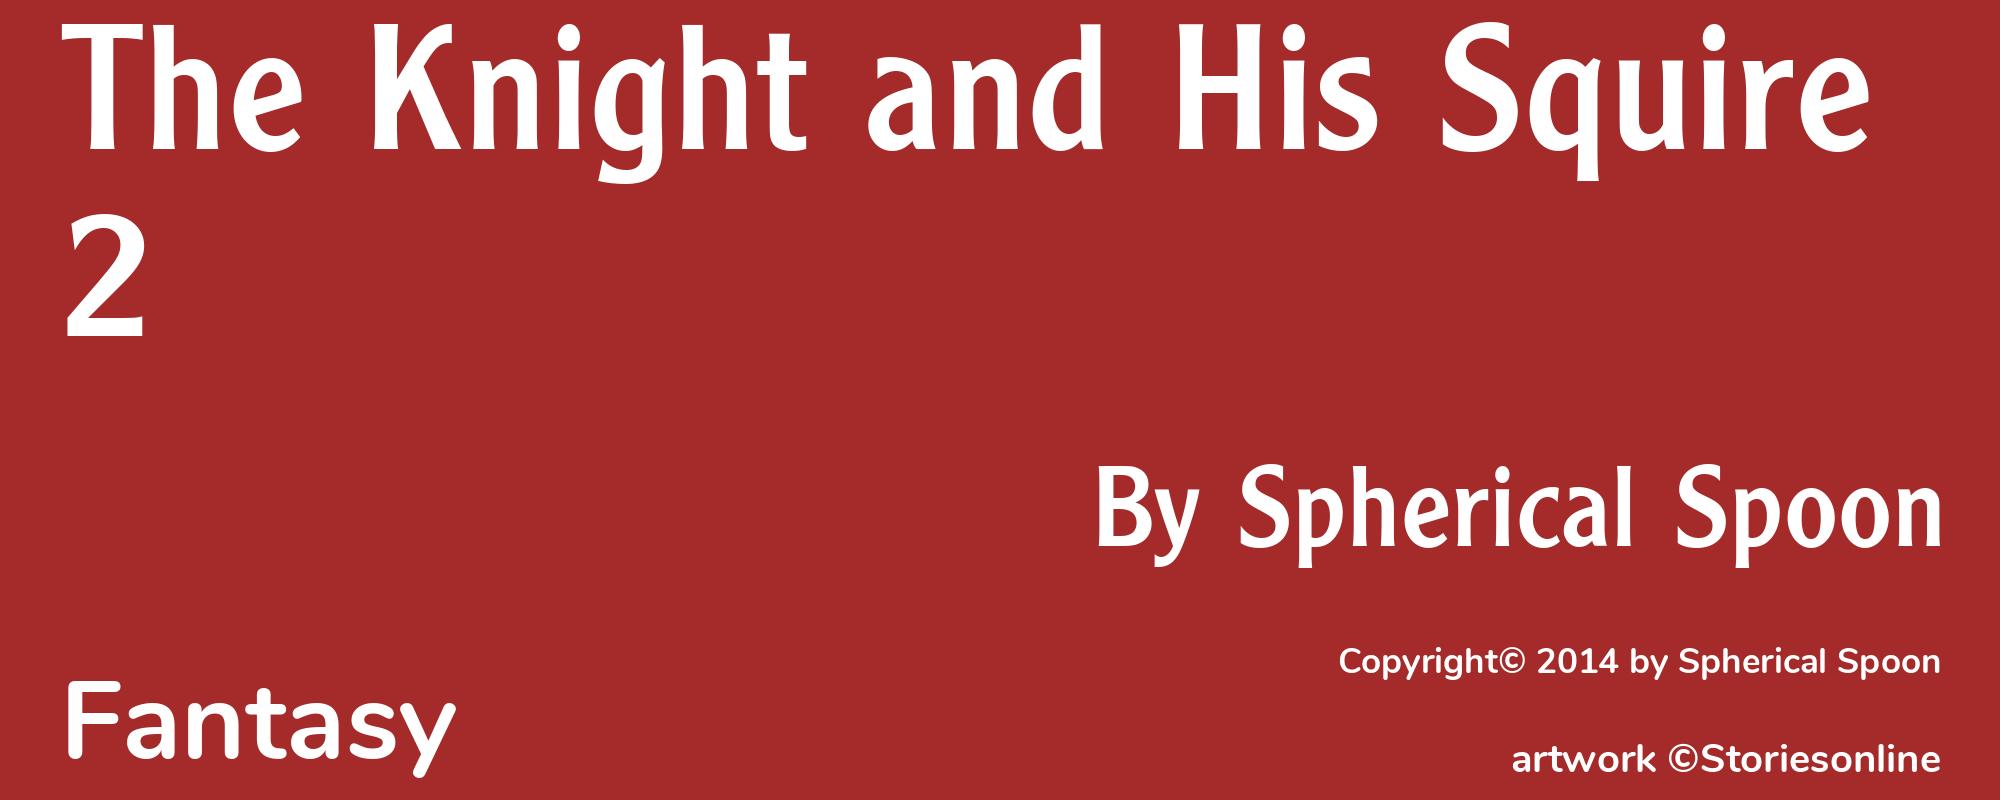 The Knight and His Squire 2 - Cover